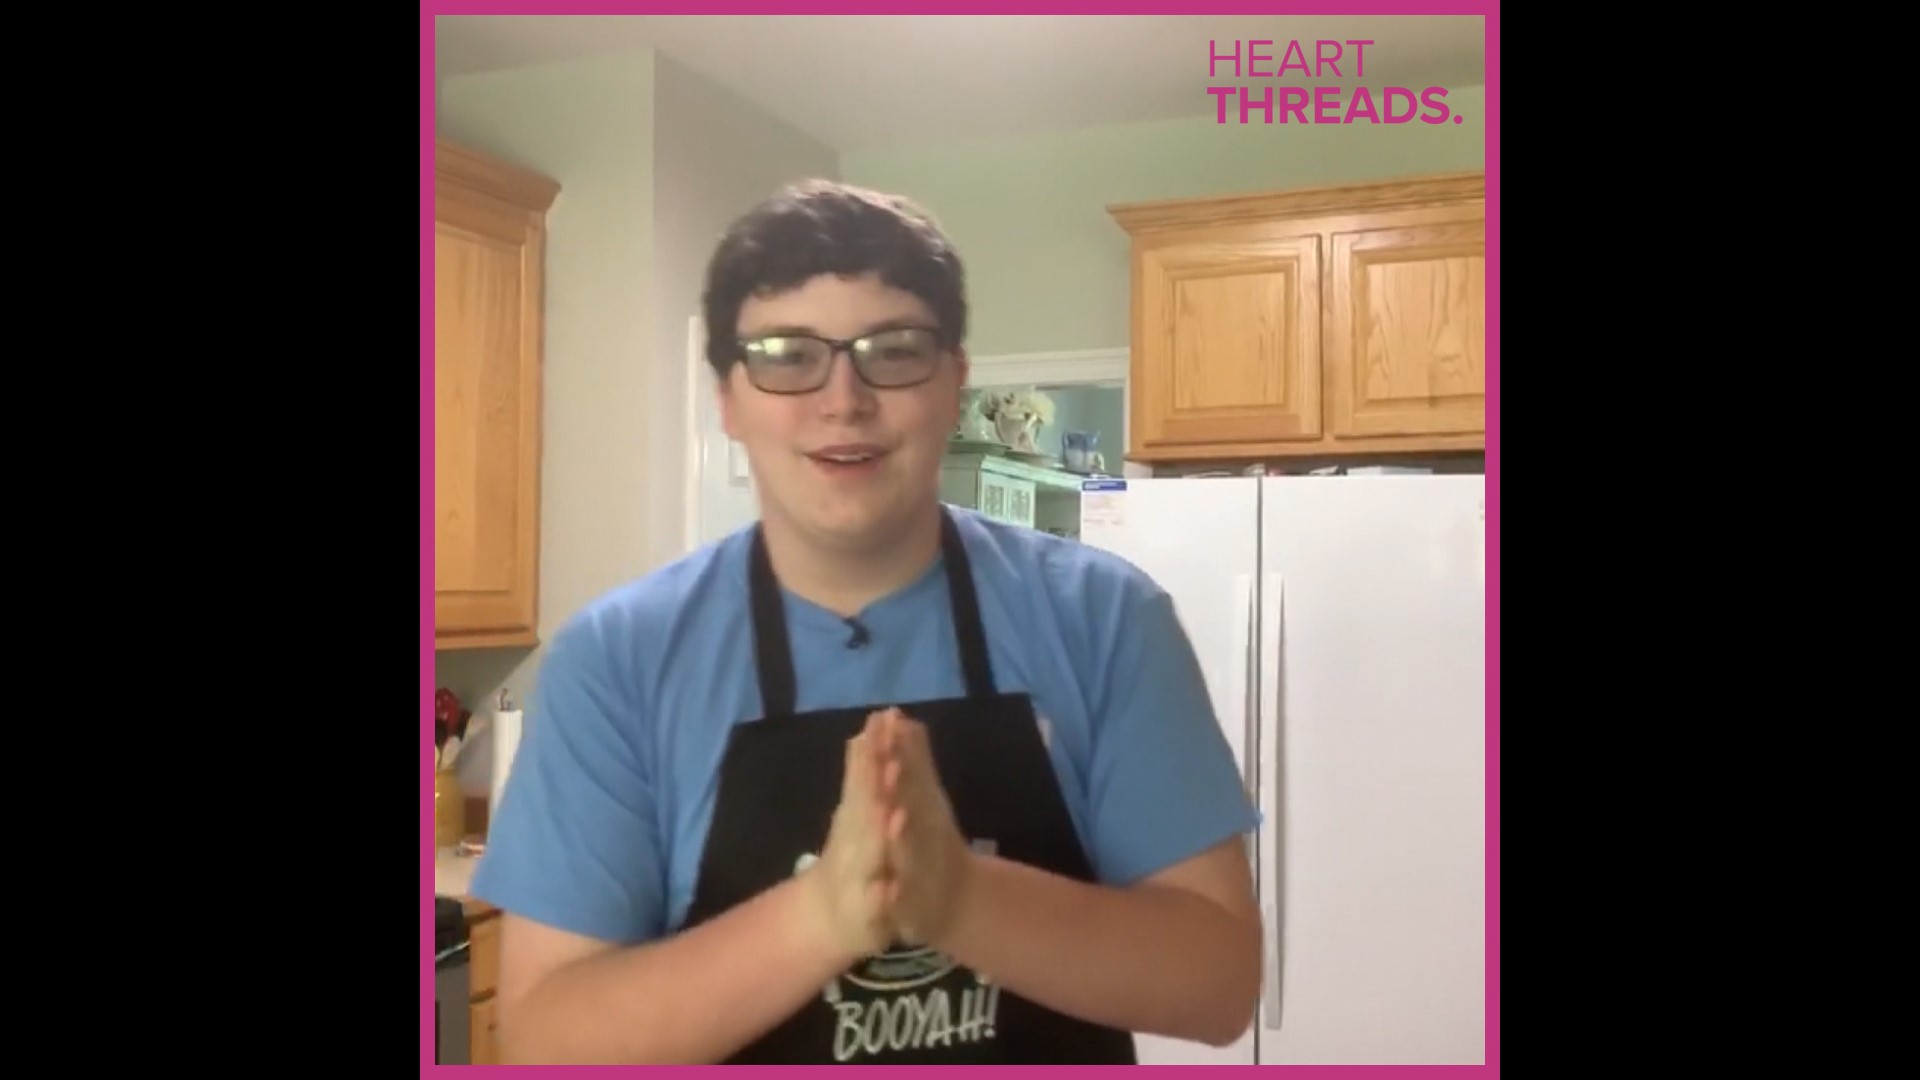 Bullying nearly drove Hunter, a teen with autism, to suicide. Now Hunter is baking on YouTube to overcome his haters.